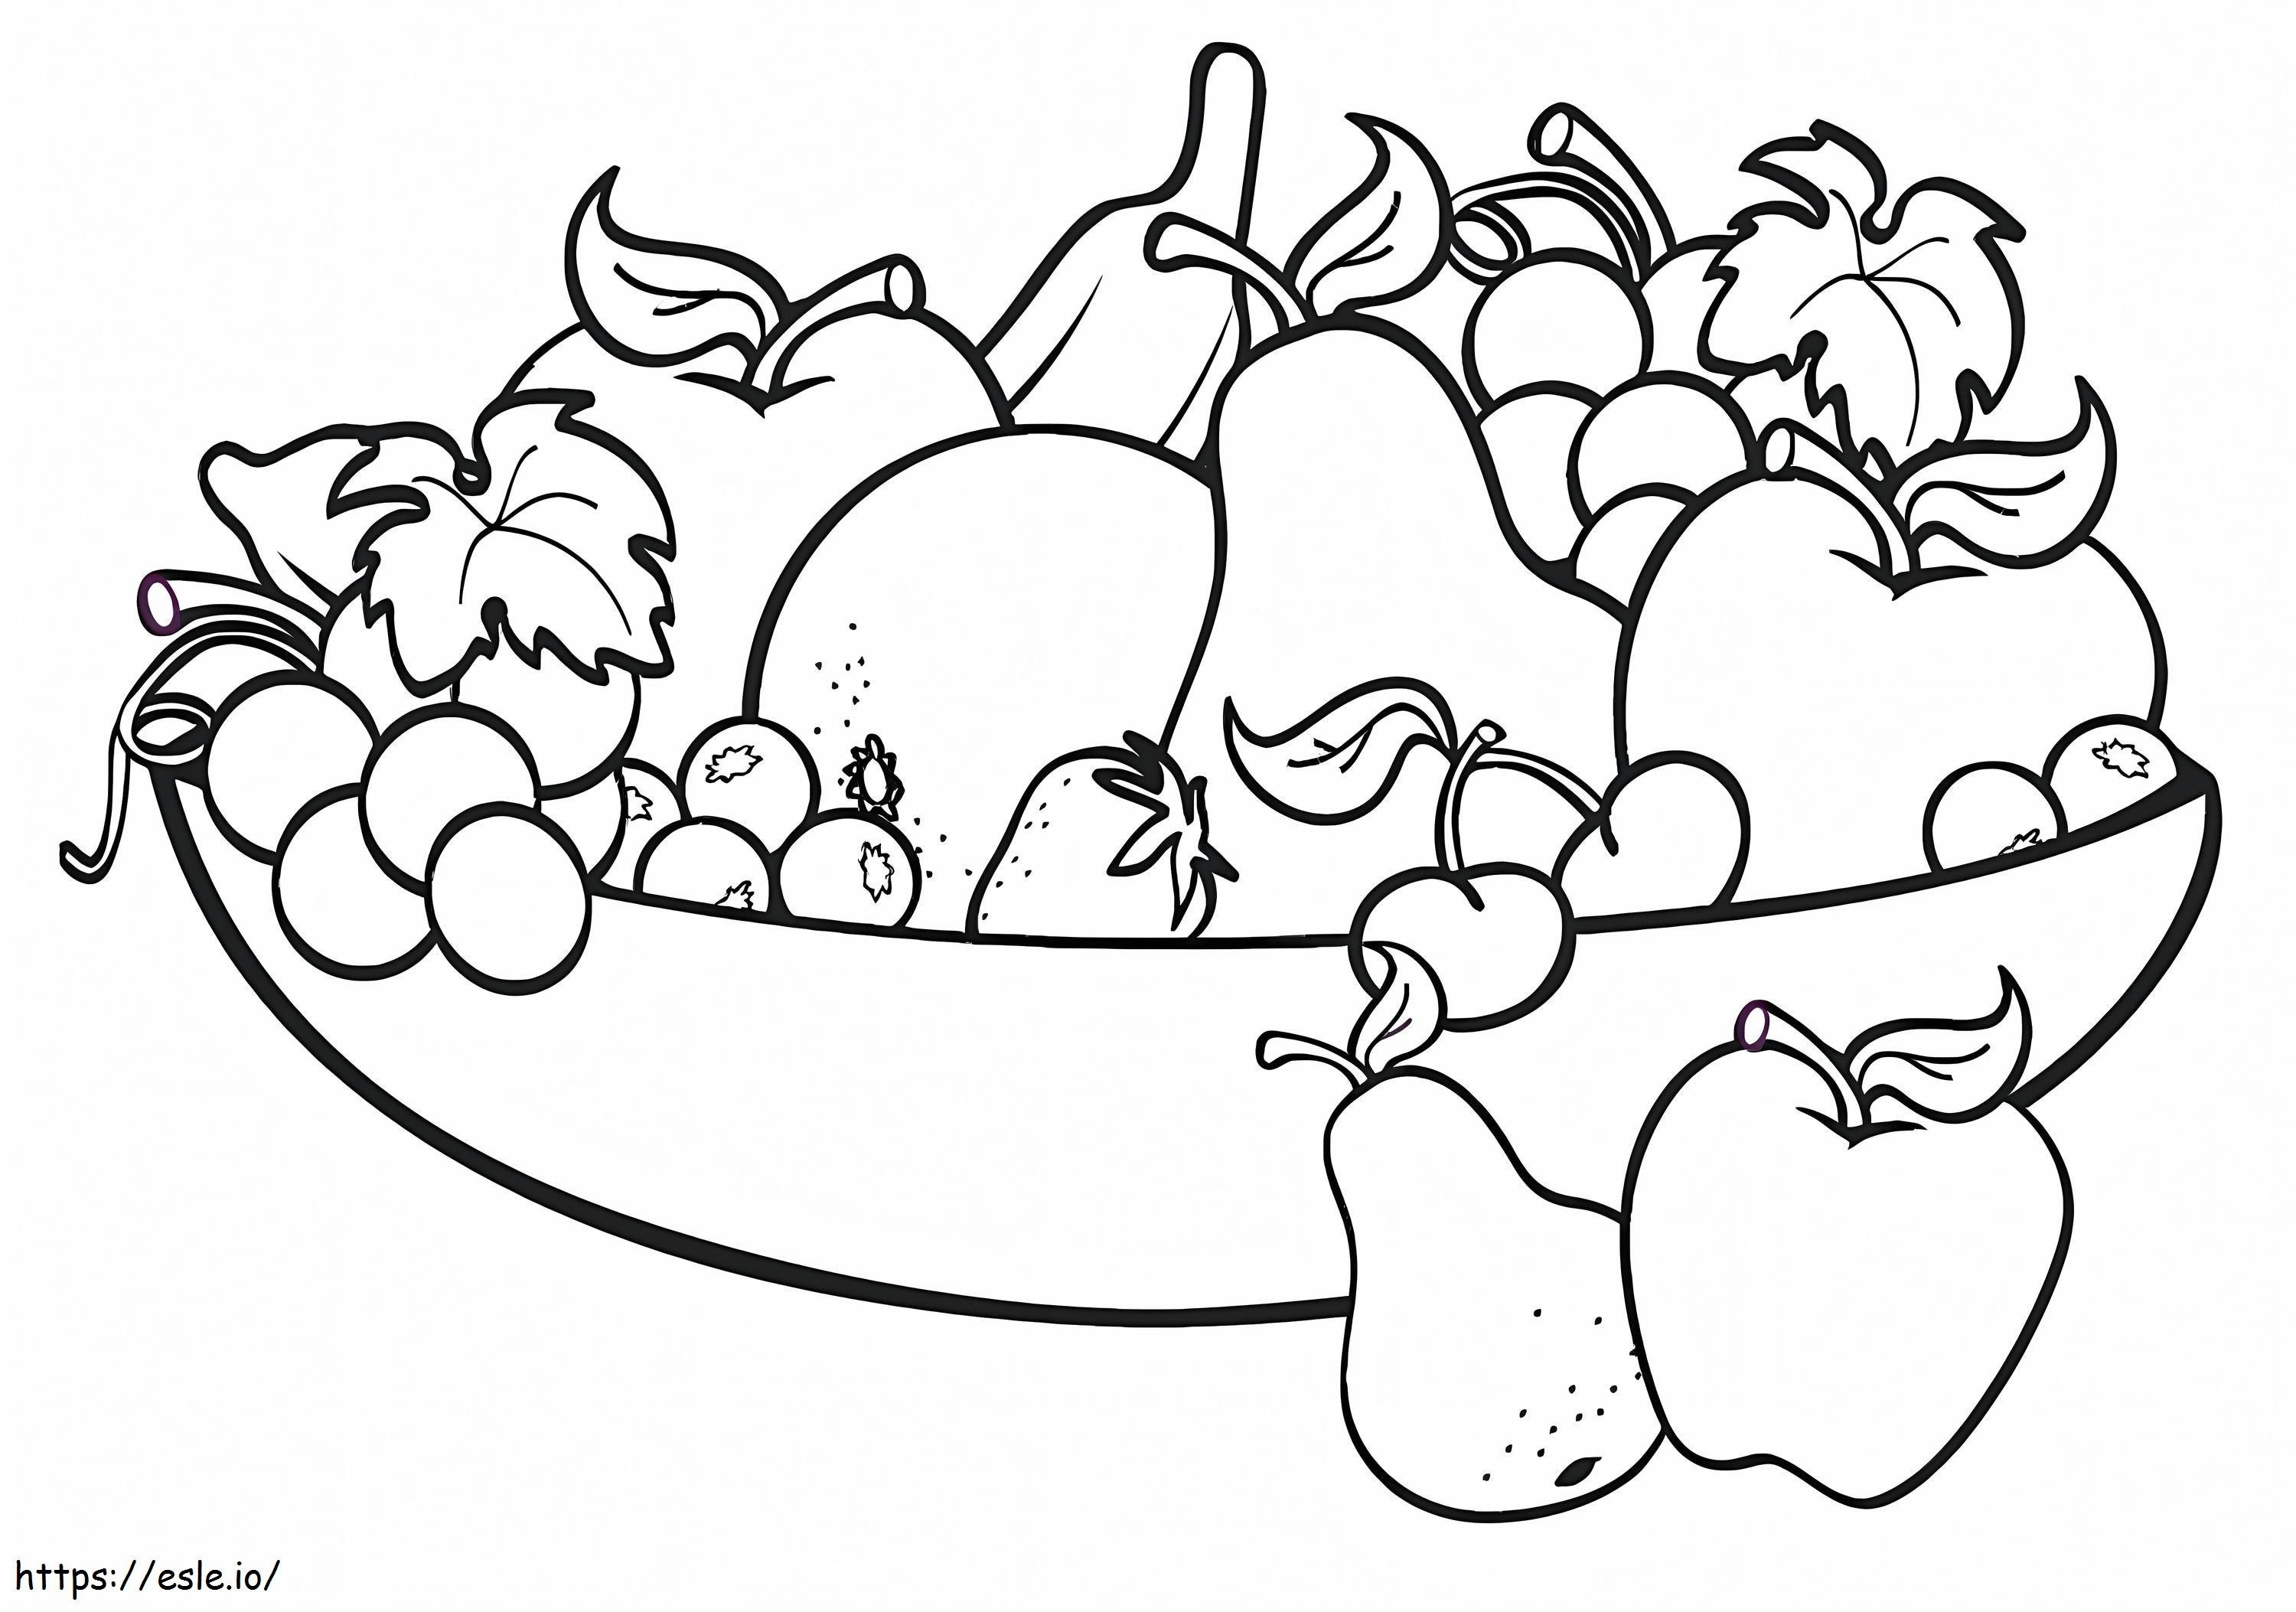 Fruit Plate coloring page